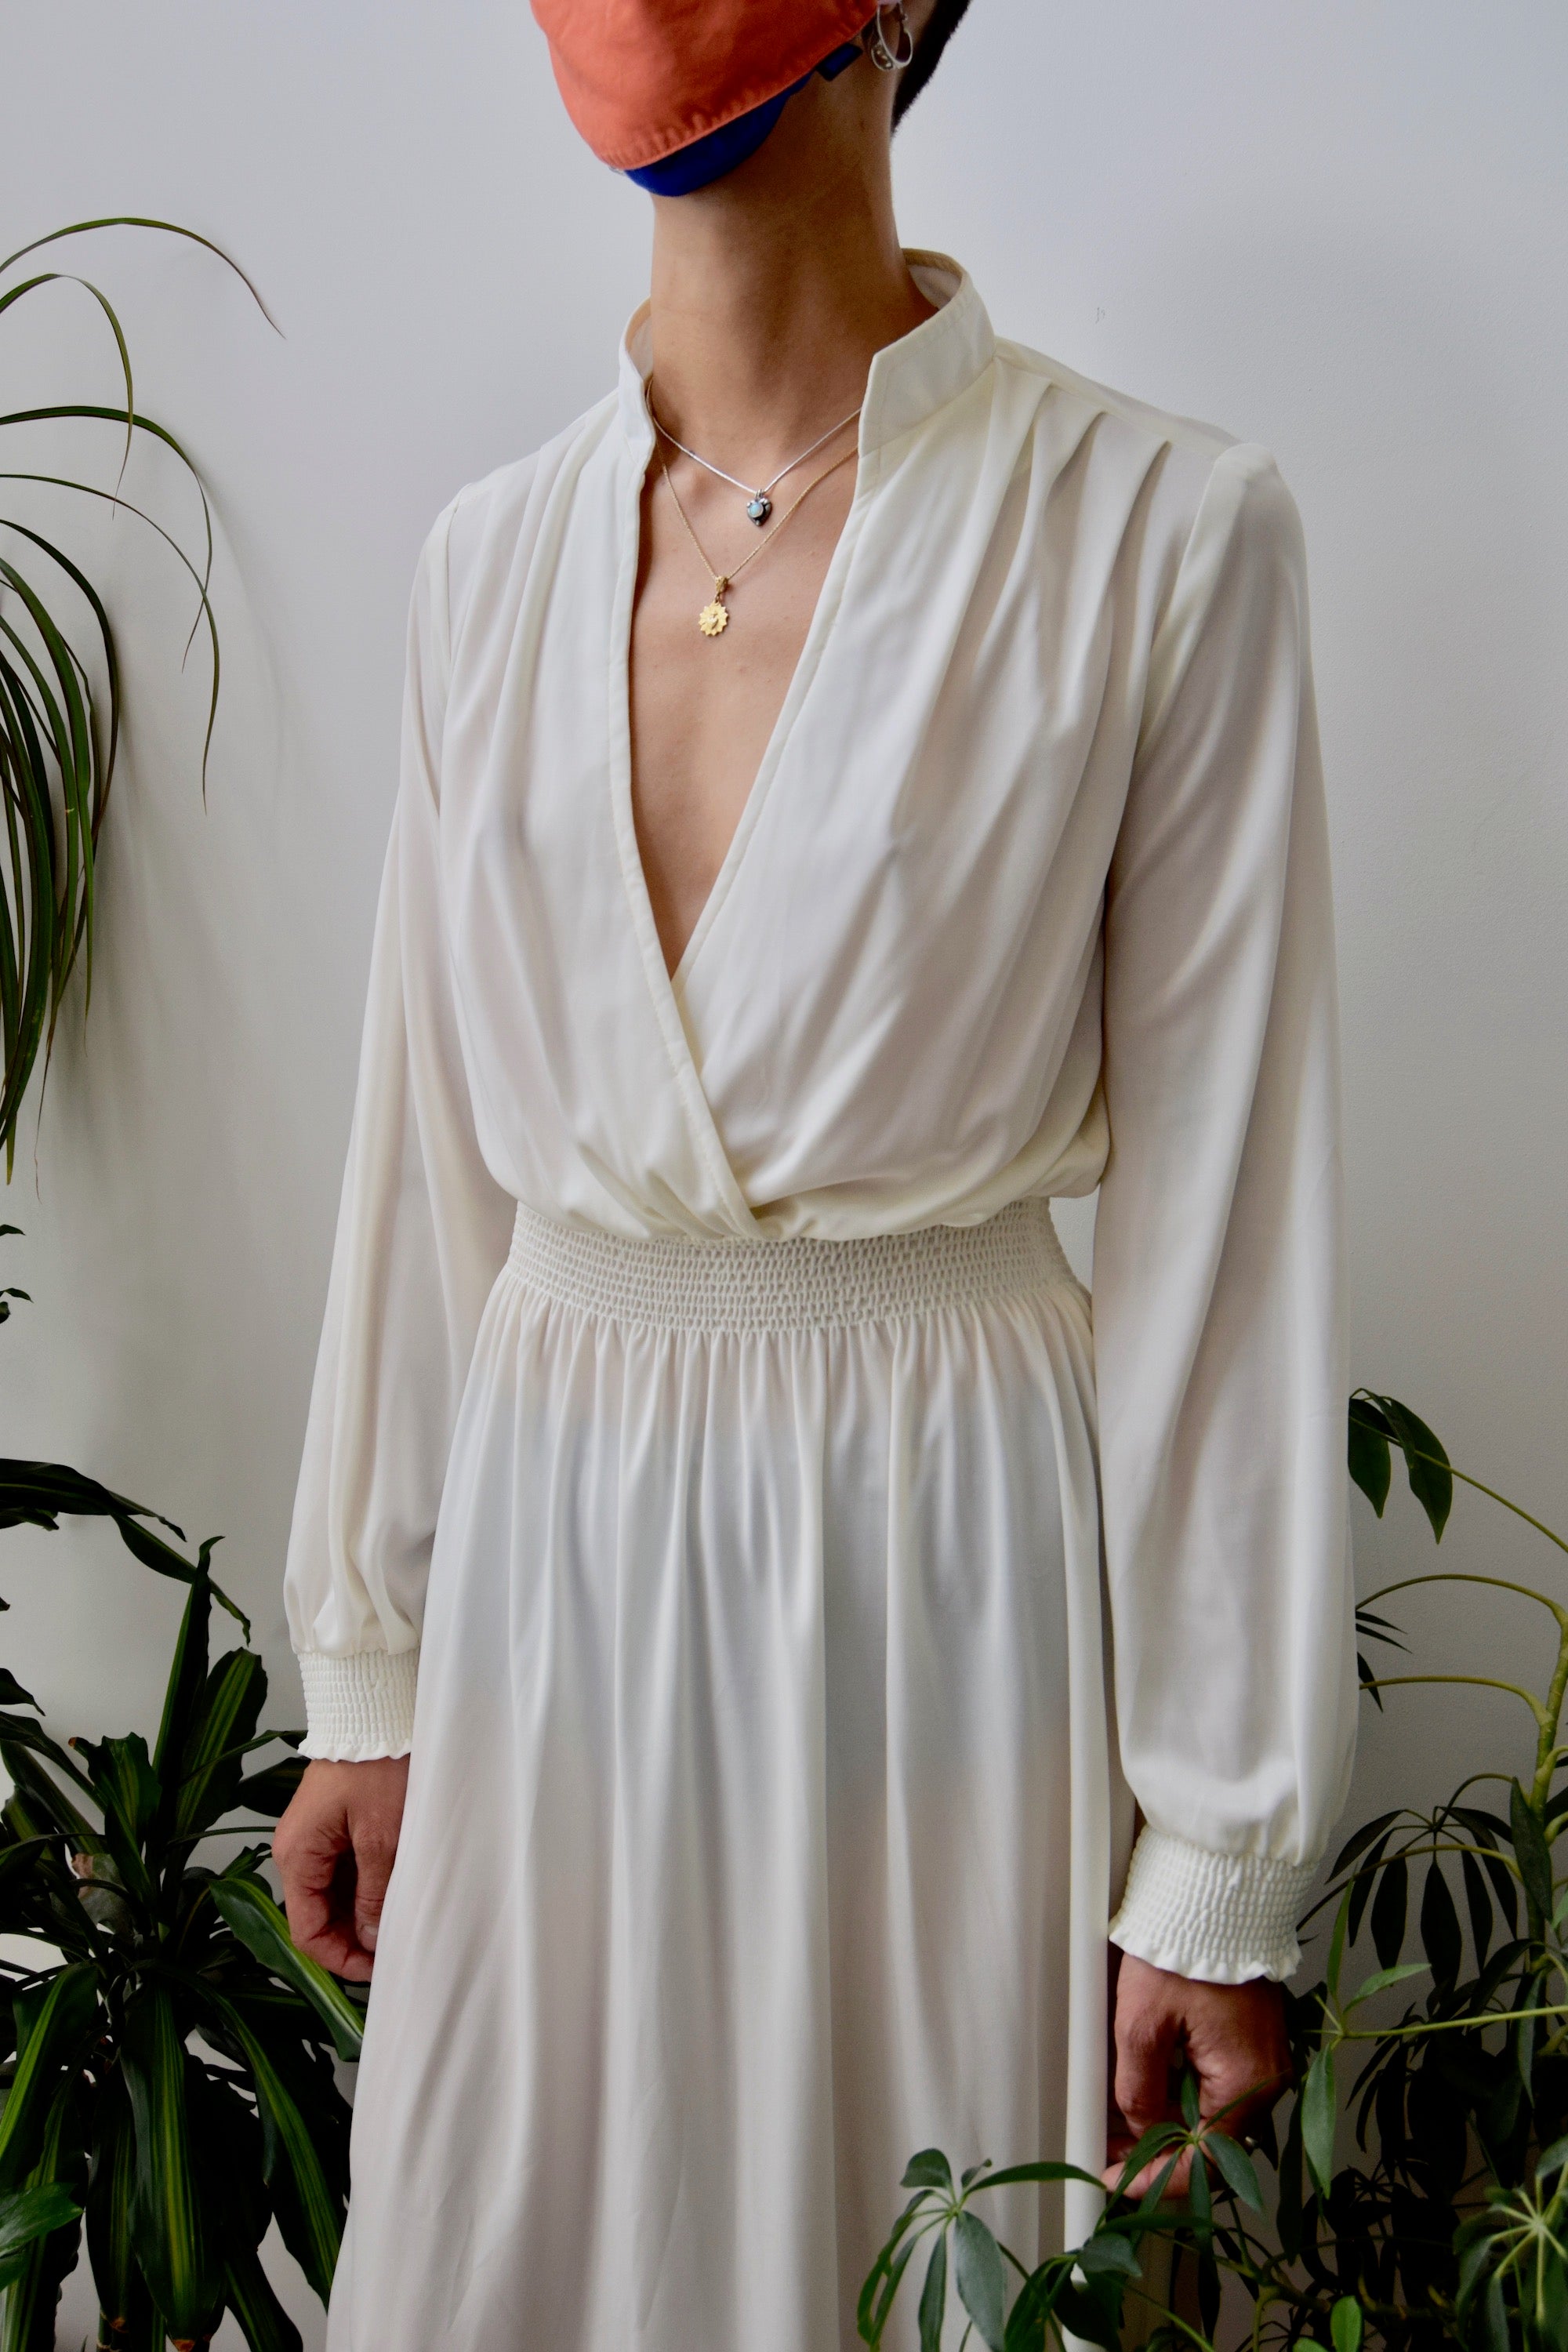 Seventies Ivory "Young Edwardian" Dress